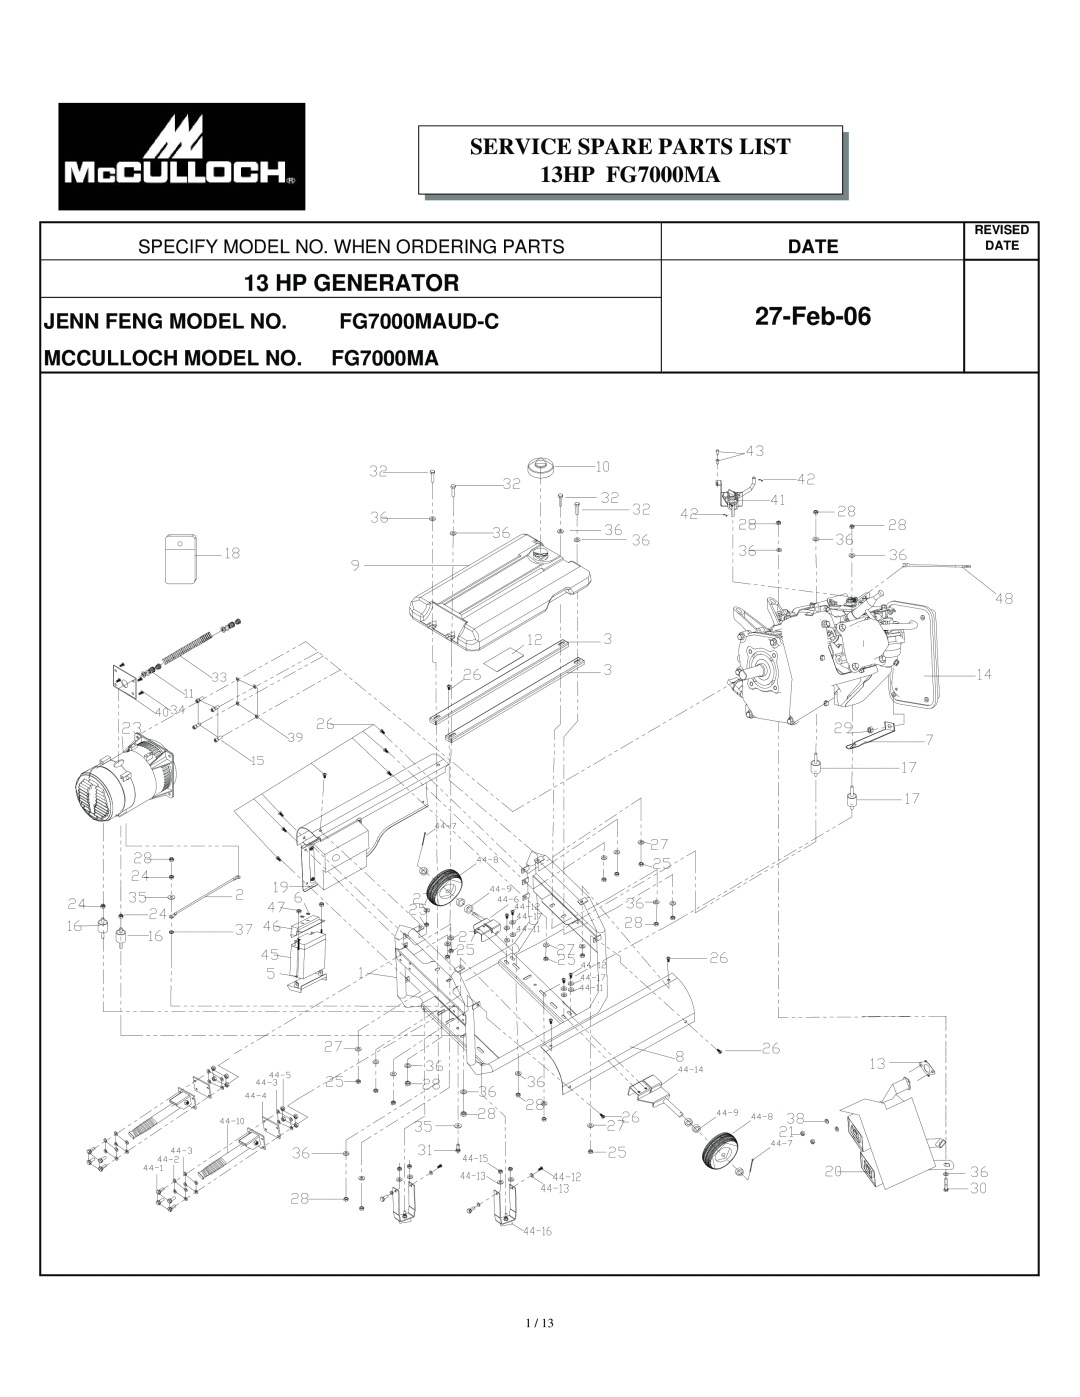 McCulloch Feb-06, SERVICE SPARE PARTS LIST 13HP FG7000MA, Hp Generator, Jenn Feng Model No, FG7000MAUD-C, Date, Revised 